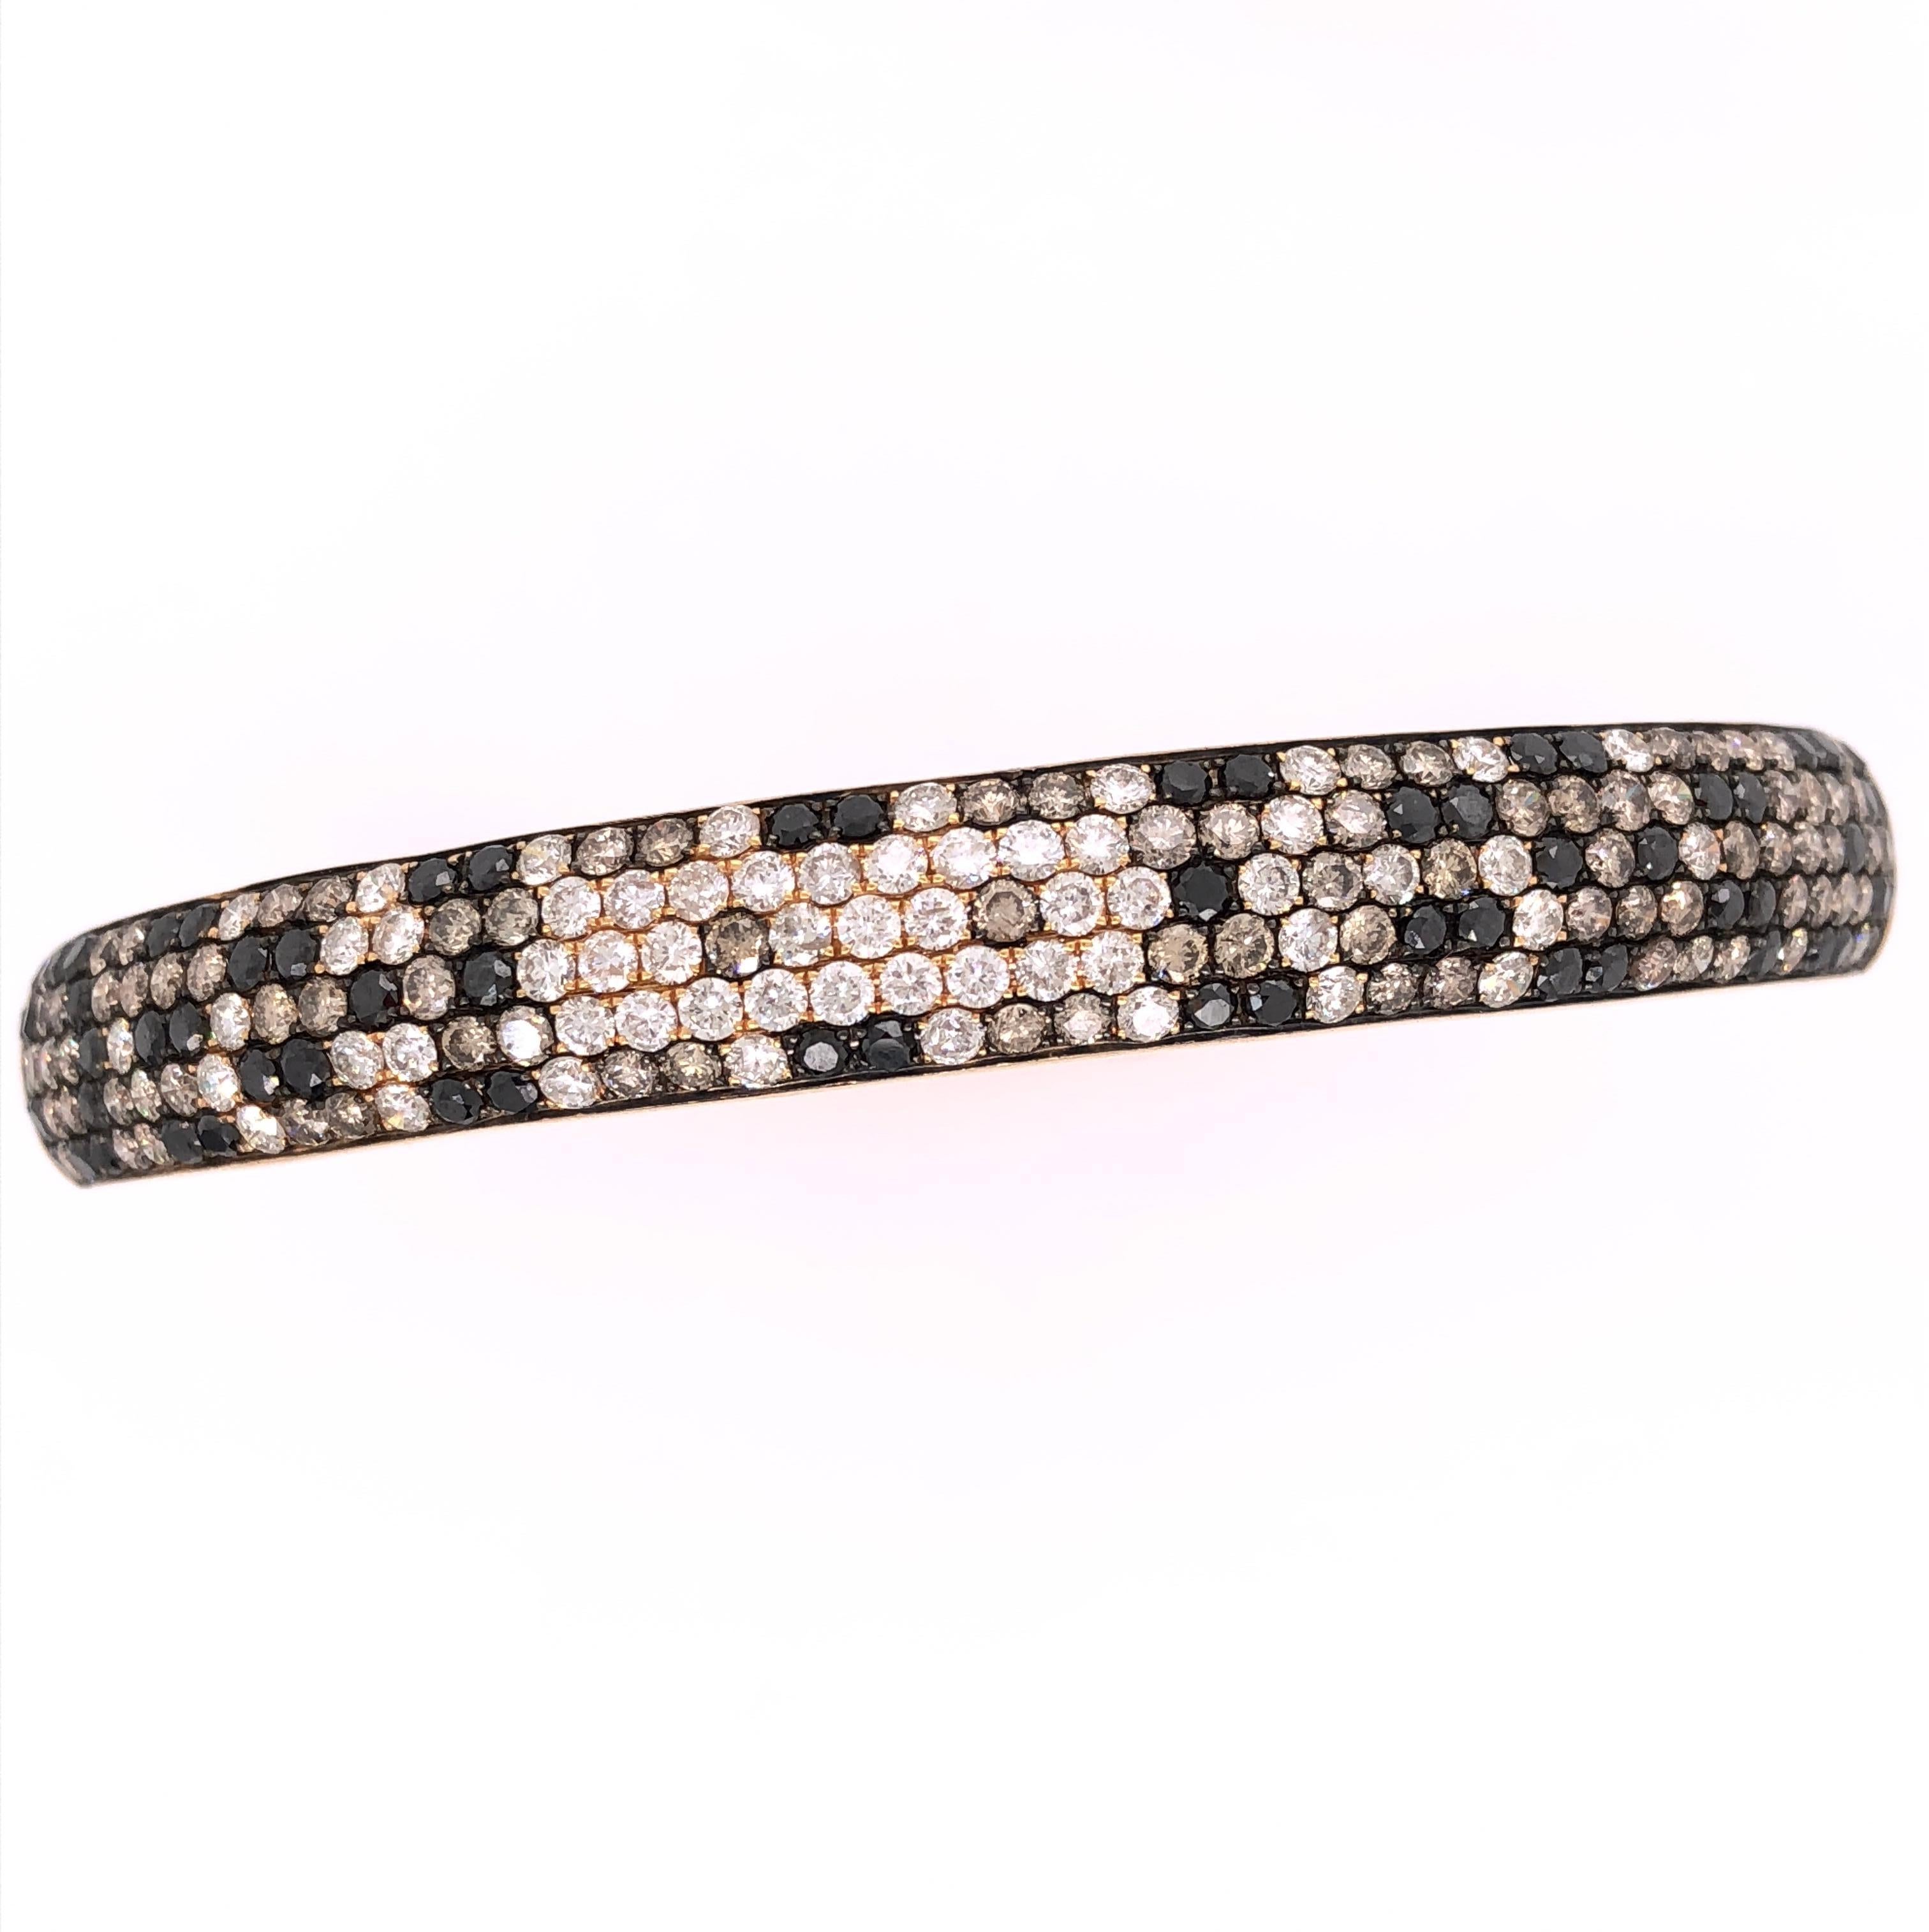 18K Rose Gold
Brown Diamonds: 2.81ct total weight.
Black Diamonds: 1.72ct total weight.
Diamonds: 1.51ct total weight.
All diamonds are G-H/SI stones.
Width - is approximately 1cm/0.40inches.